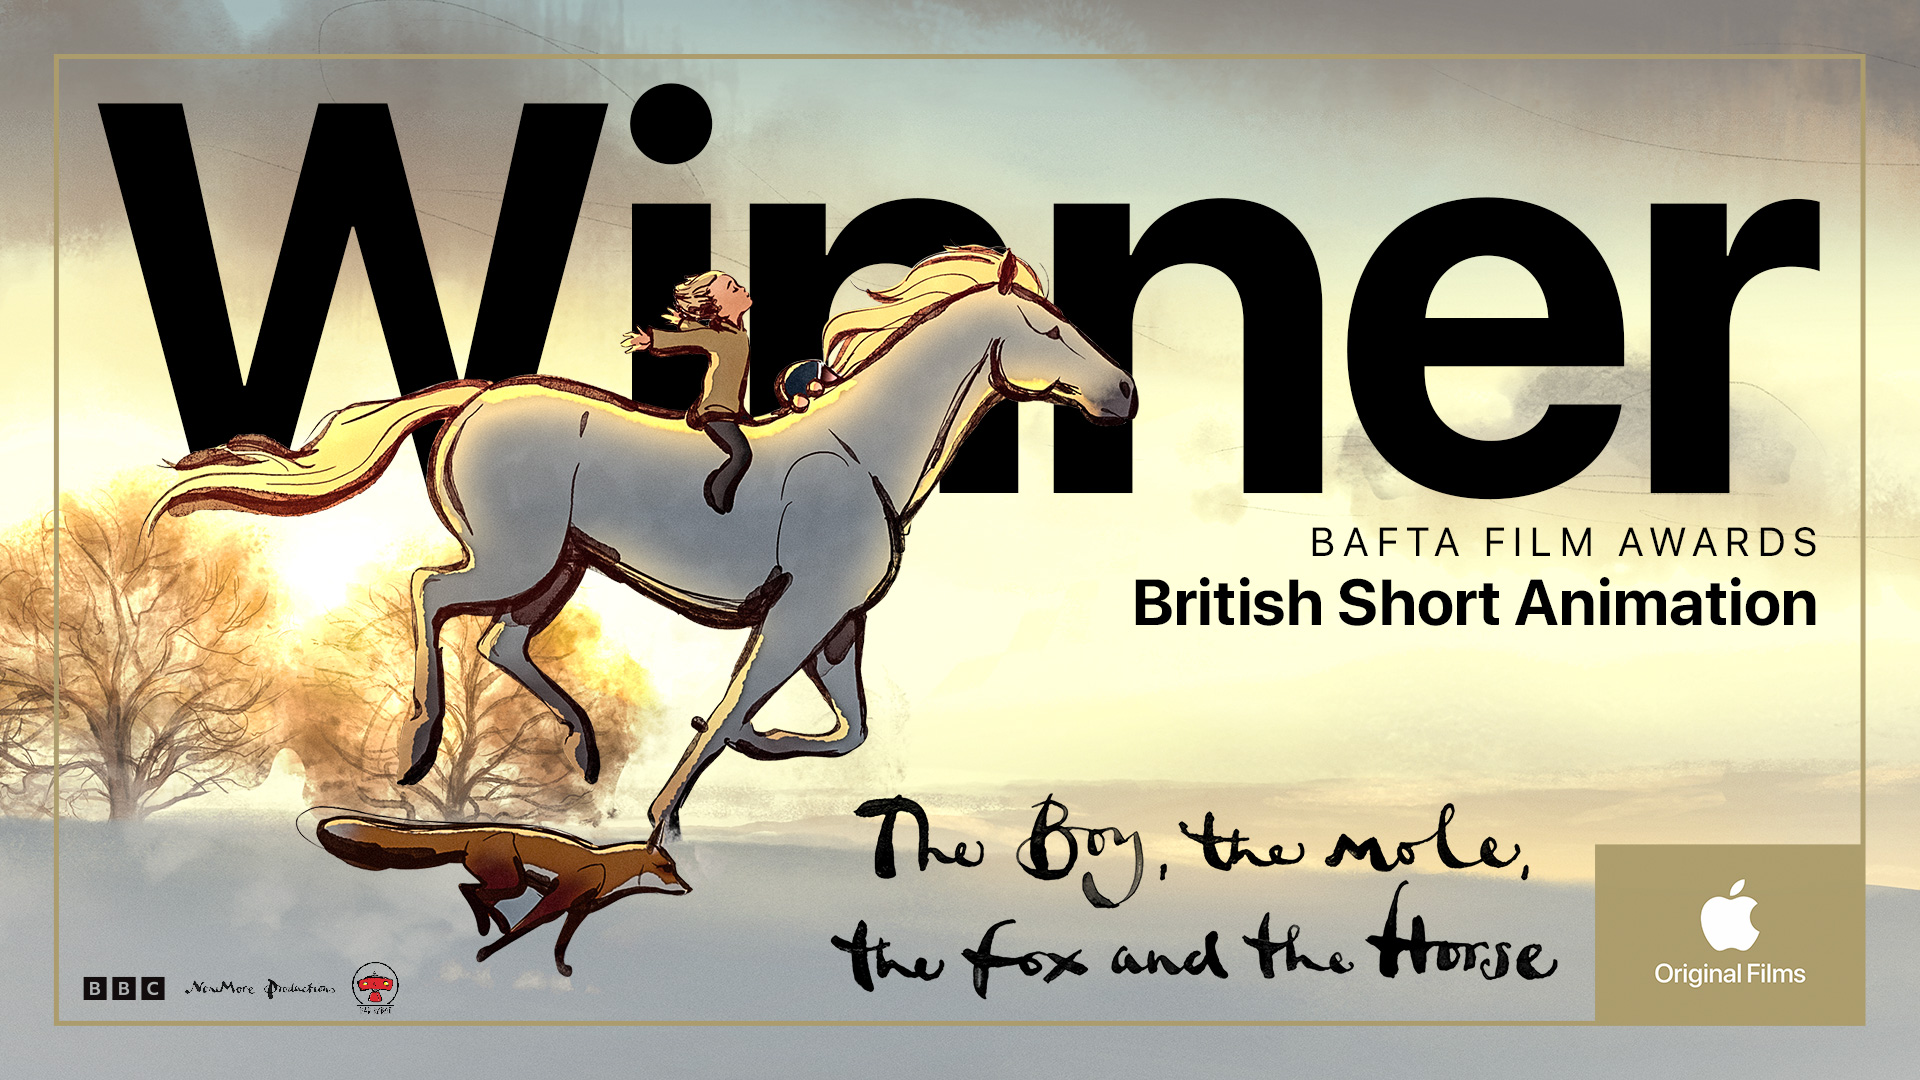 Apple Original Films on X: Congratulations to @peterbaynton,  @charliemackesy, Cara Speller, and Hannah Minghella on their #BAFTAs win  for British Short Animation for The Boy, the Mole, the Fox and the Horse.